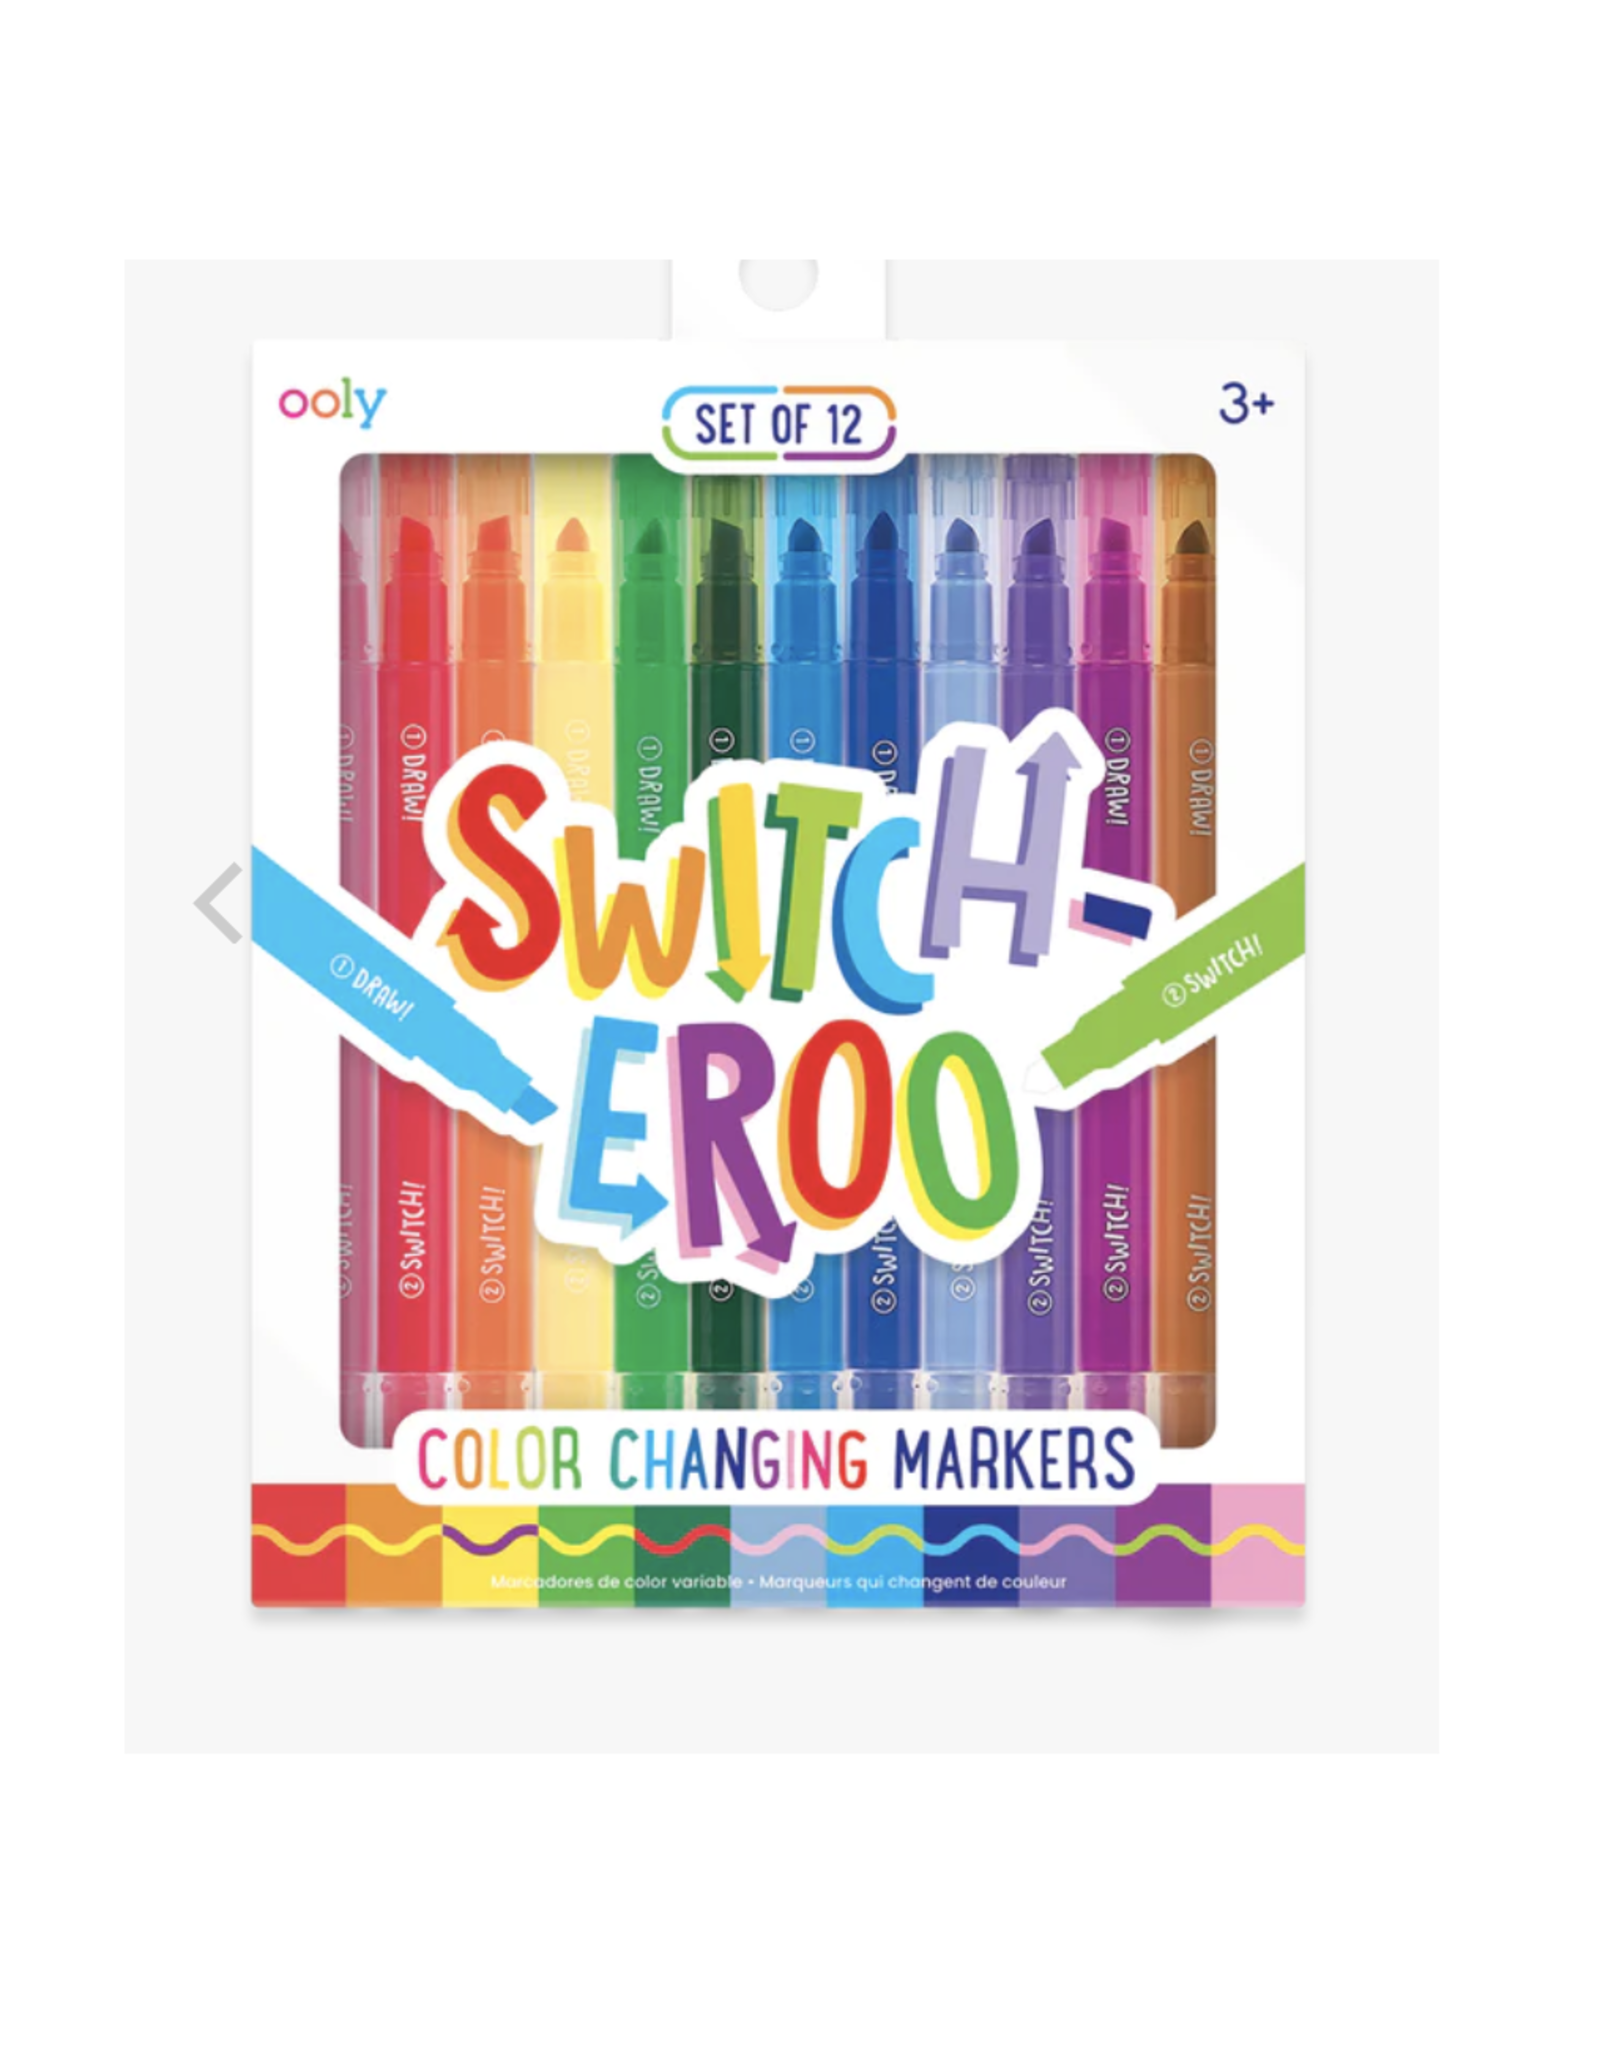 Ooly Switch-eroo Color Changing Markers 2.0 (Set of 12)